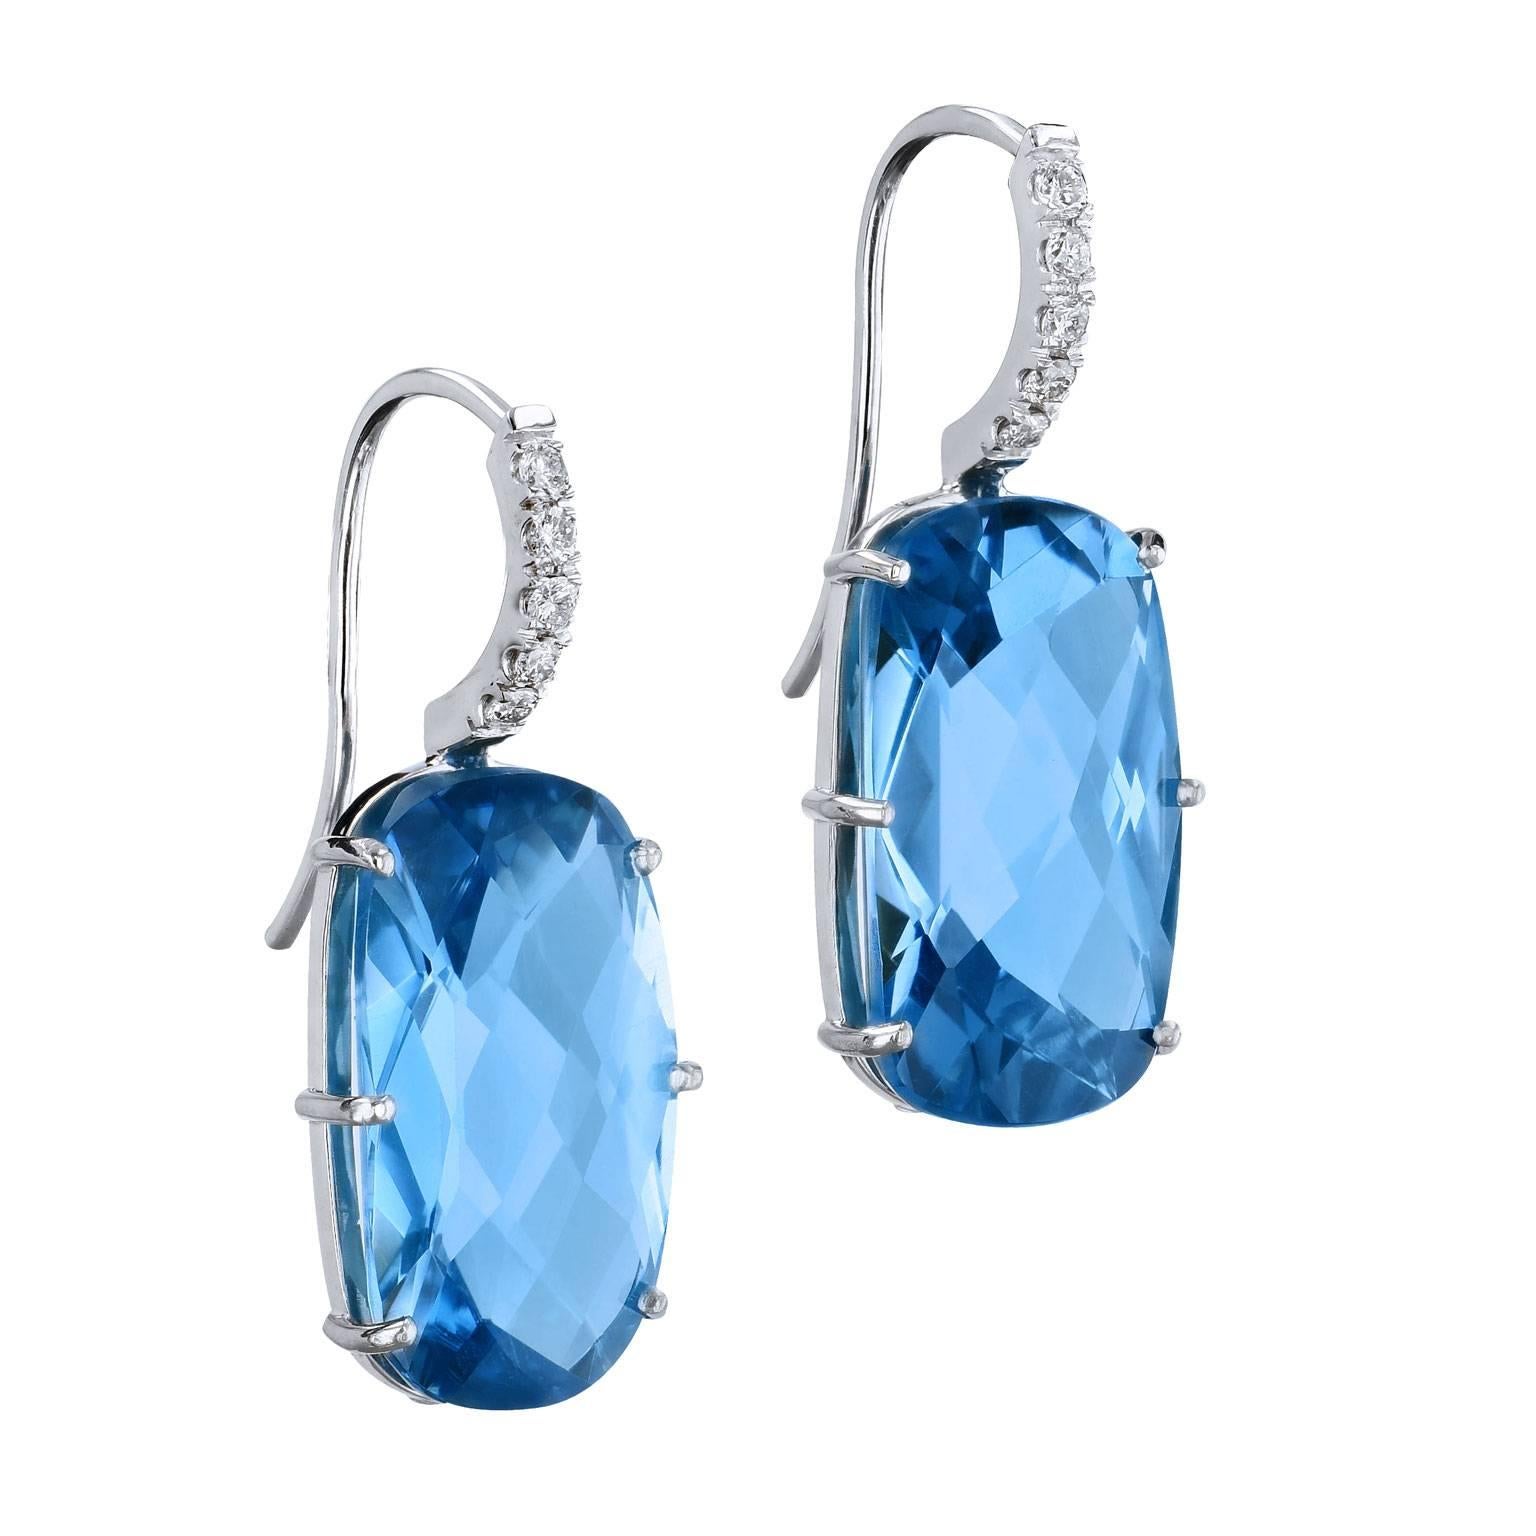 20.34 Carat Blue Topaz with Diamond Pave Earrings in 18 Karat White Gold 

These beautiful earrings are one of a kind and handmade by H&H Jewels.  They are fashioned in 18 karat white gold, with 20.34 carat of oval-shaped topaz that are prong-set